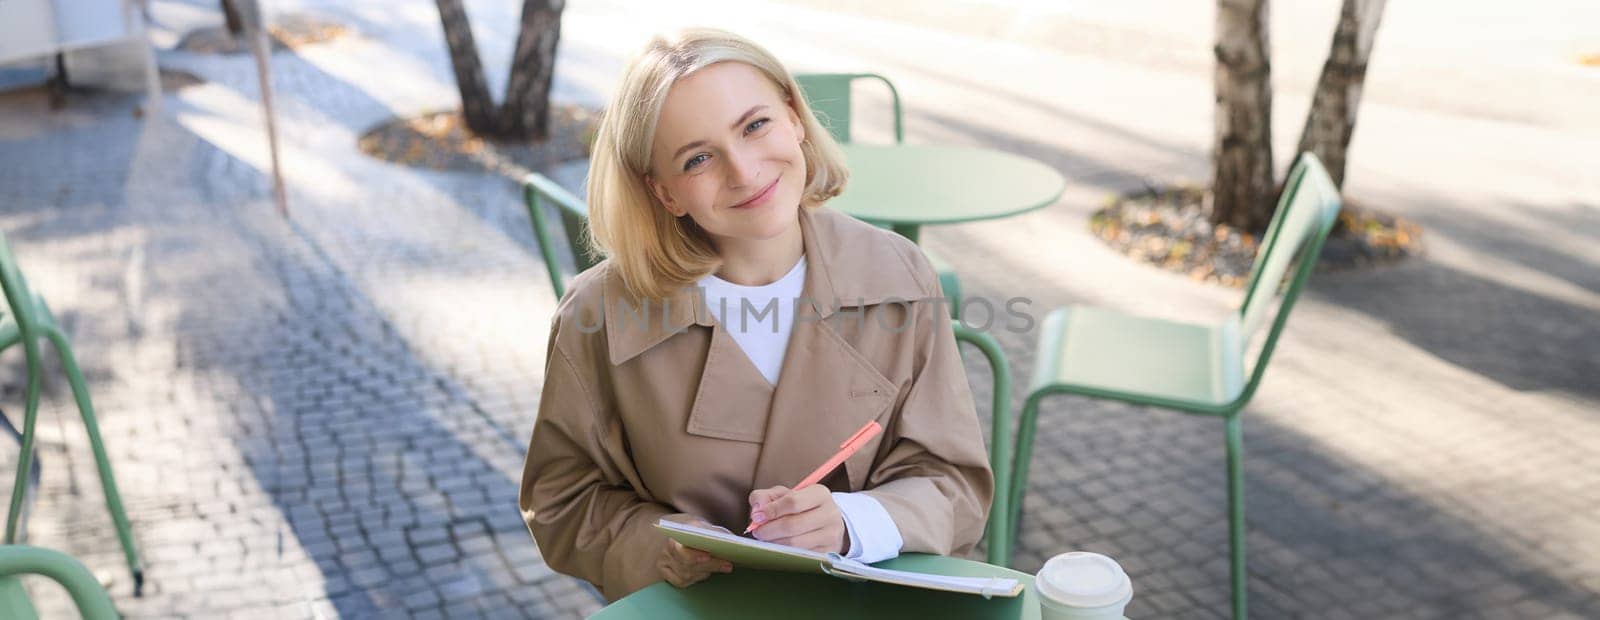 Image of young creative student, woman sitting in outdoor cafe, drawing in notebook, creating sketches in coffee shop, working on art project, smiling at camera.